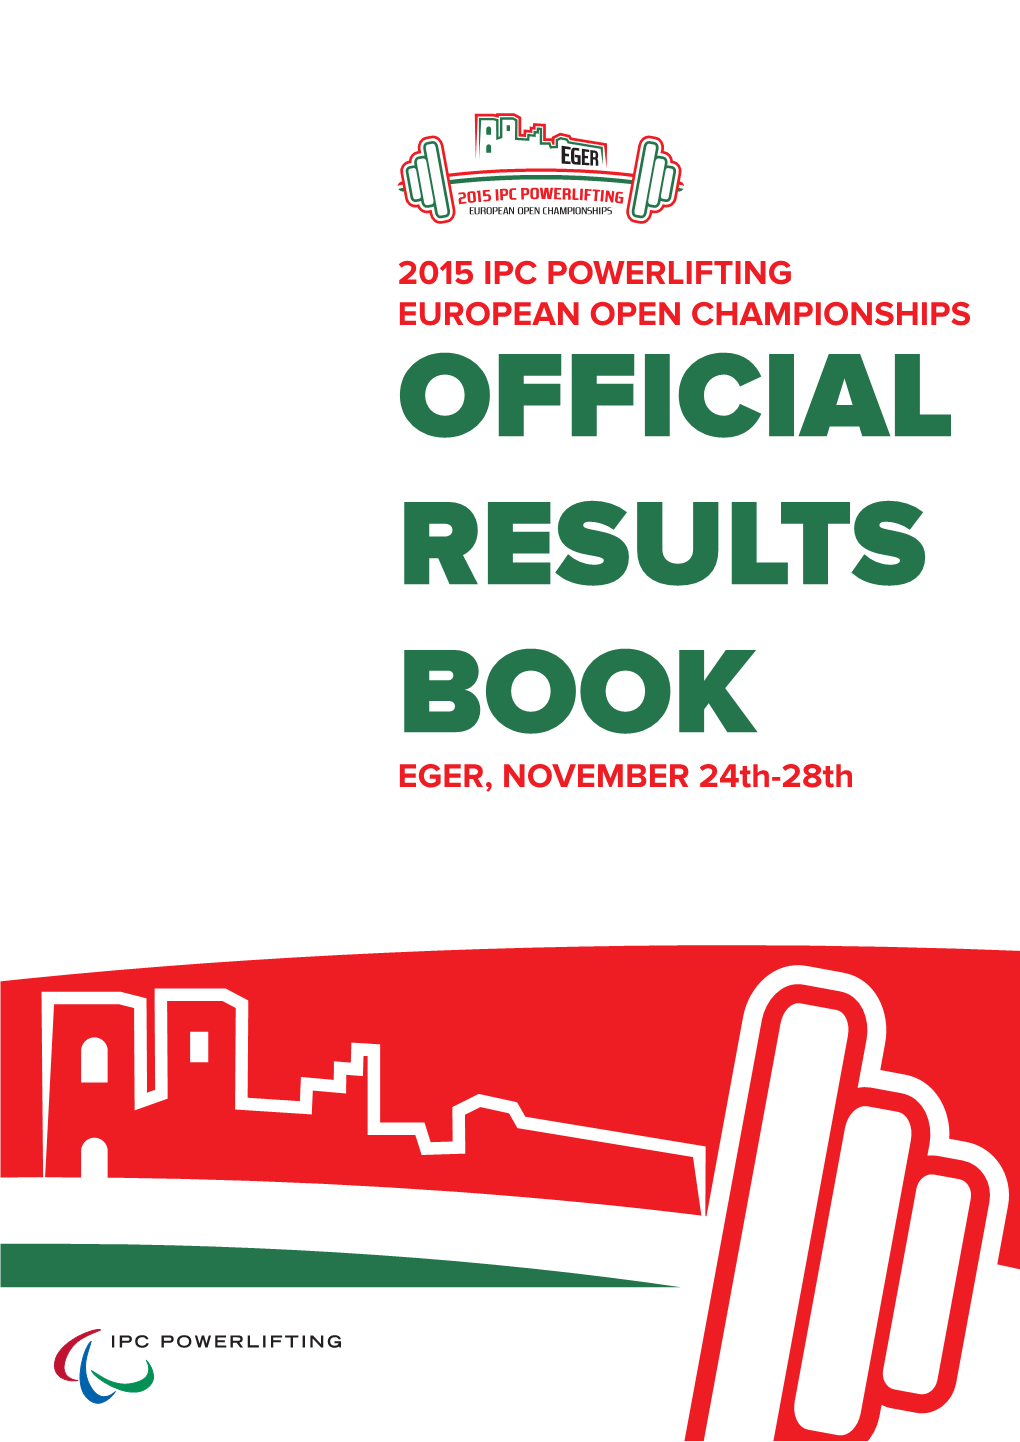 2015 IPC POWERLIFTING EUROPEAN OPEN CHAMPIONSHIPS OFFICIAL RESULTS BOOK EGER, NOVEMBER 24Th-28Th HOTEL EGER&PARK POWERLIFTING